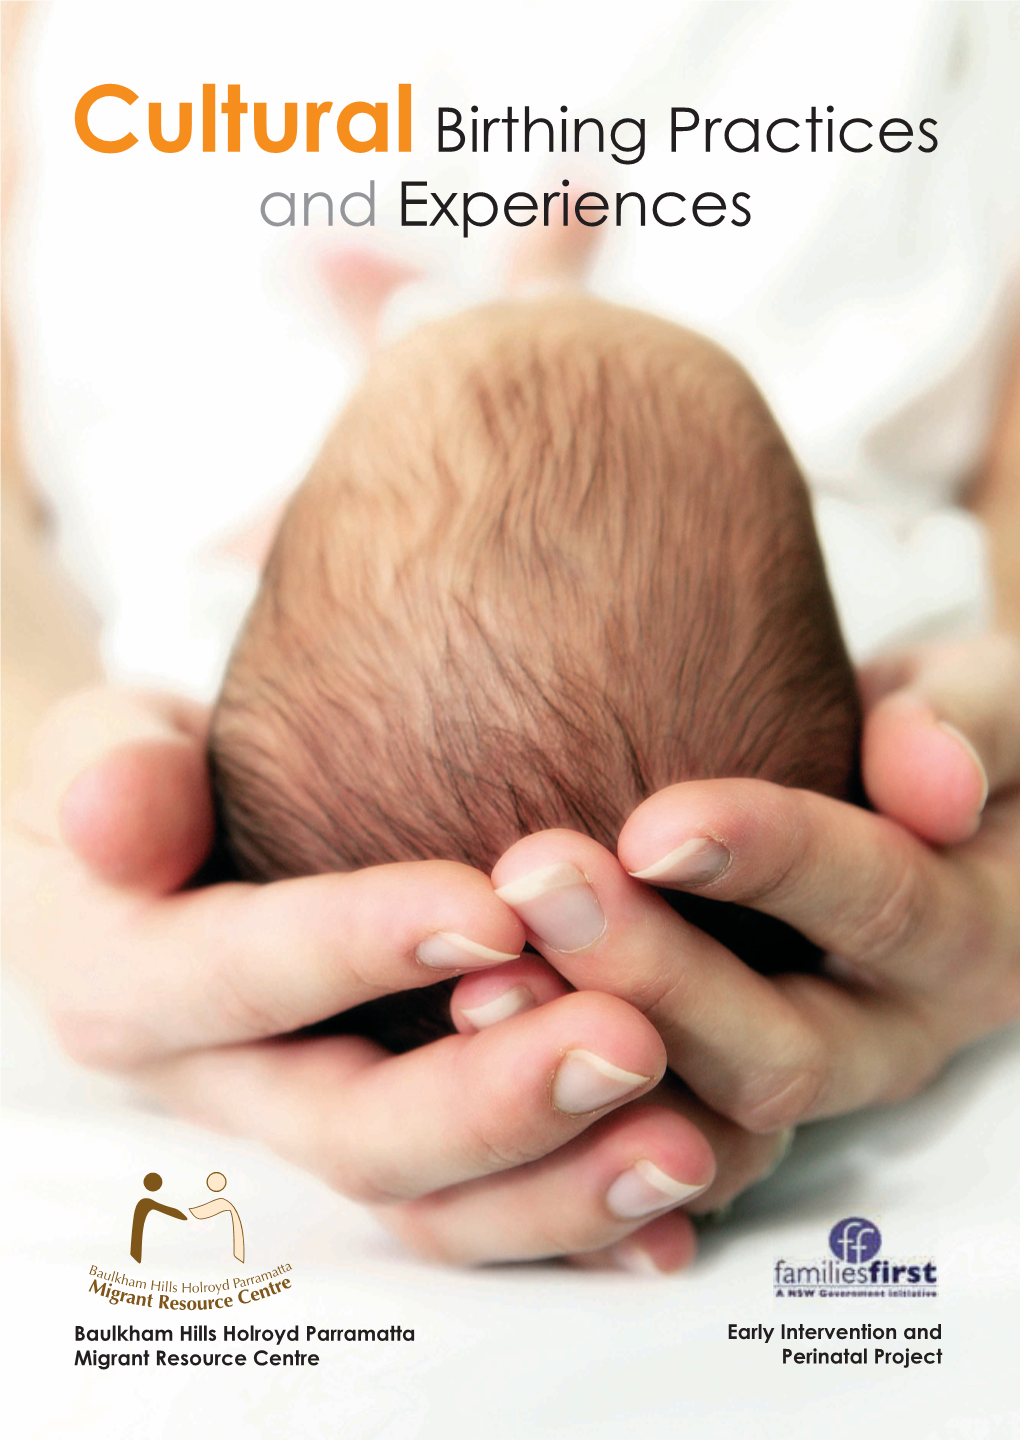 Cultural Birthing Practices and Experiences